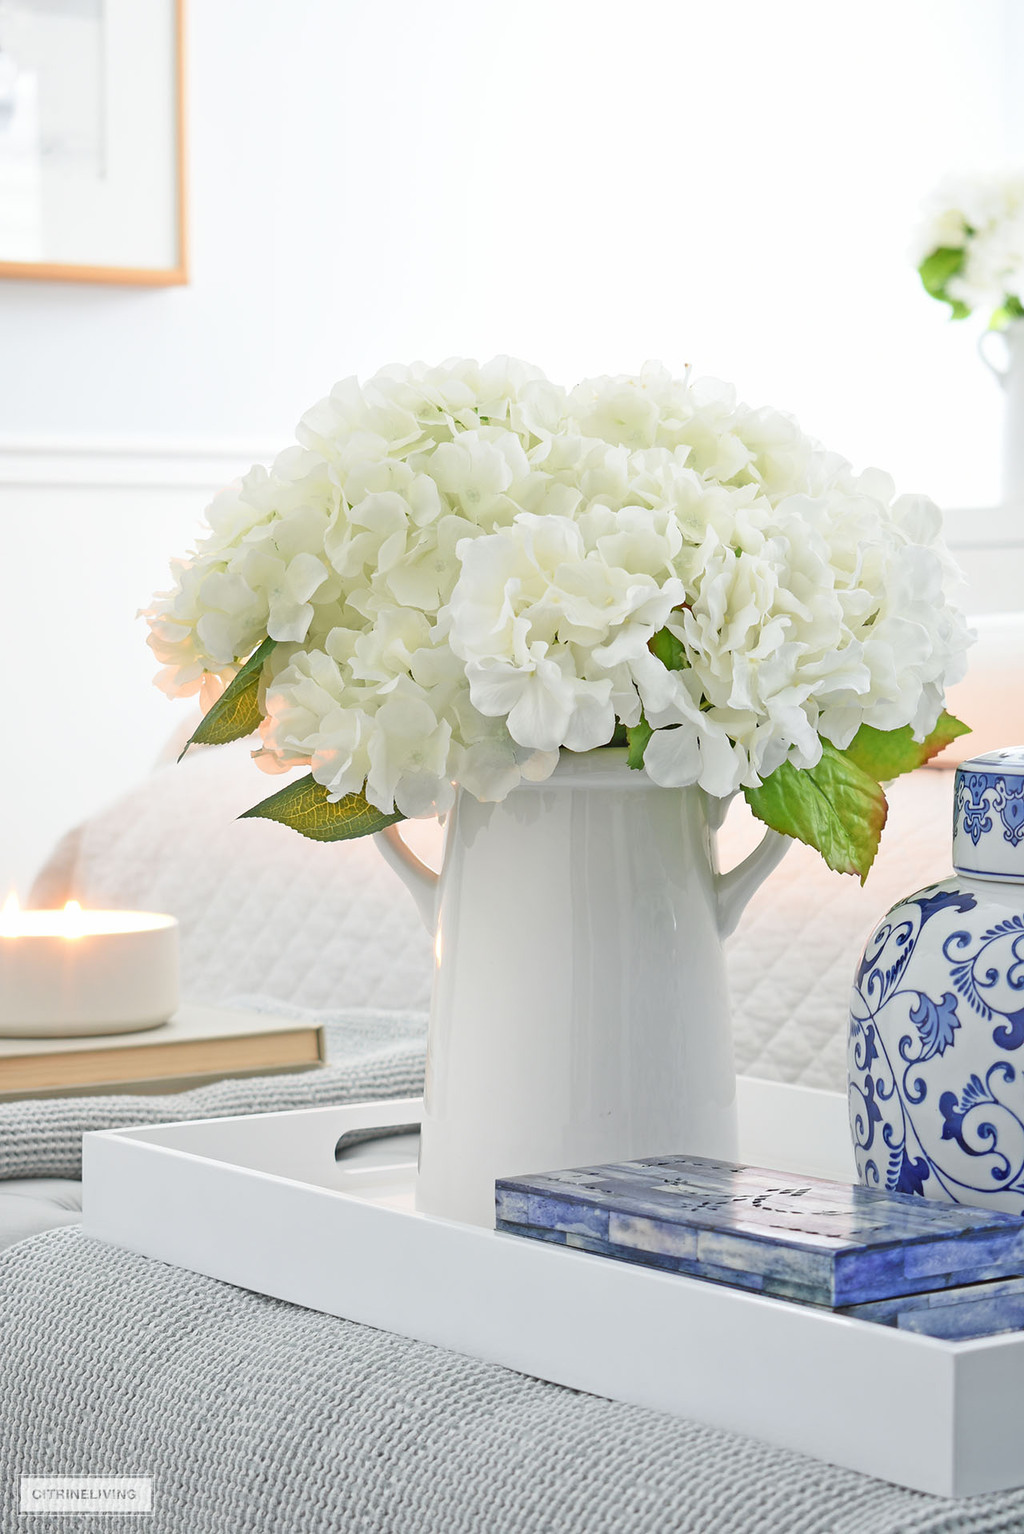 Simple white vase styled with faux hydrangeas is a beautiful bedroom accent.